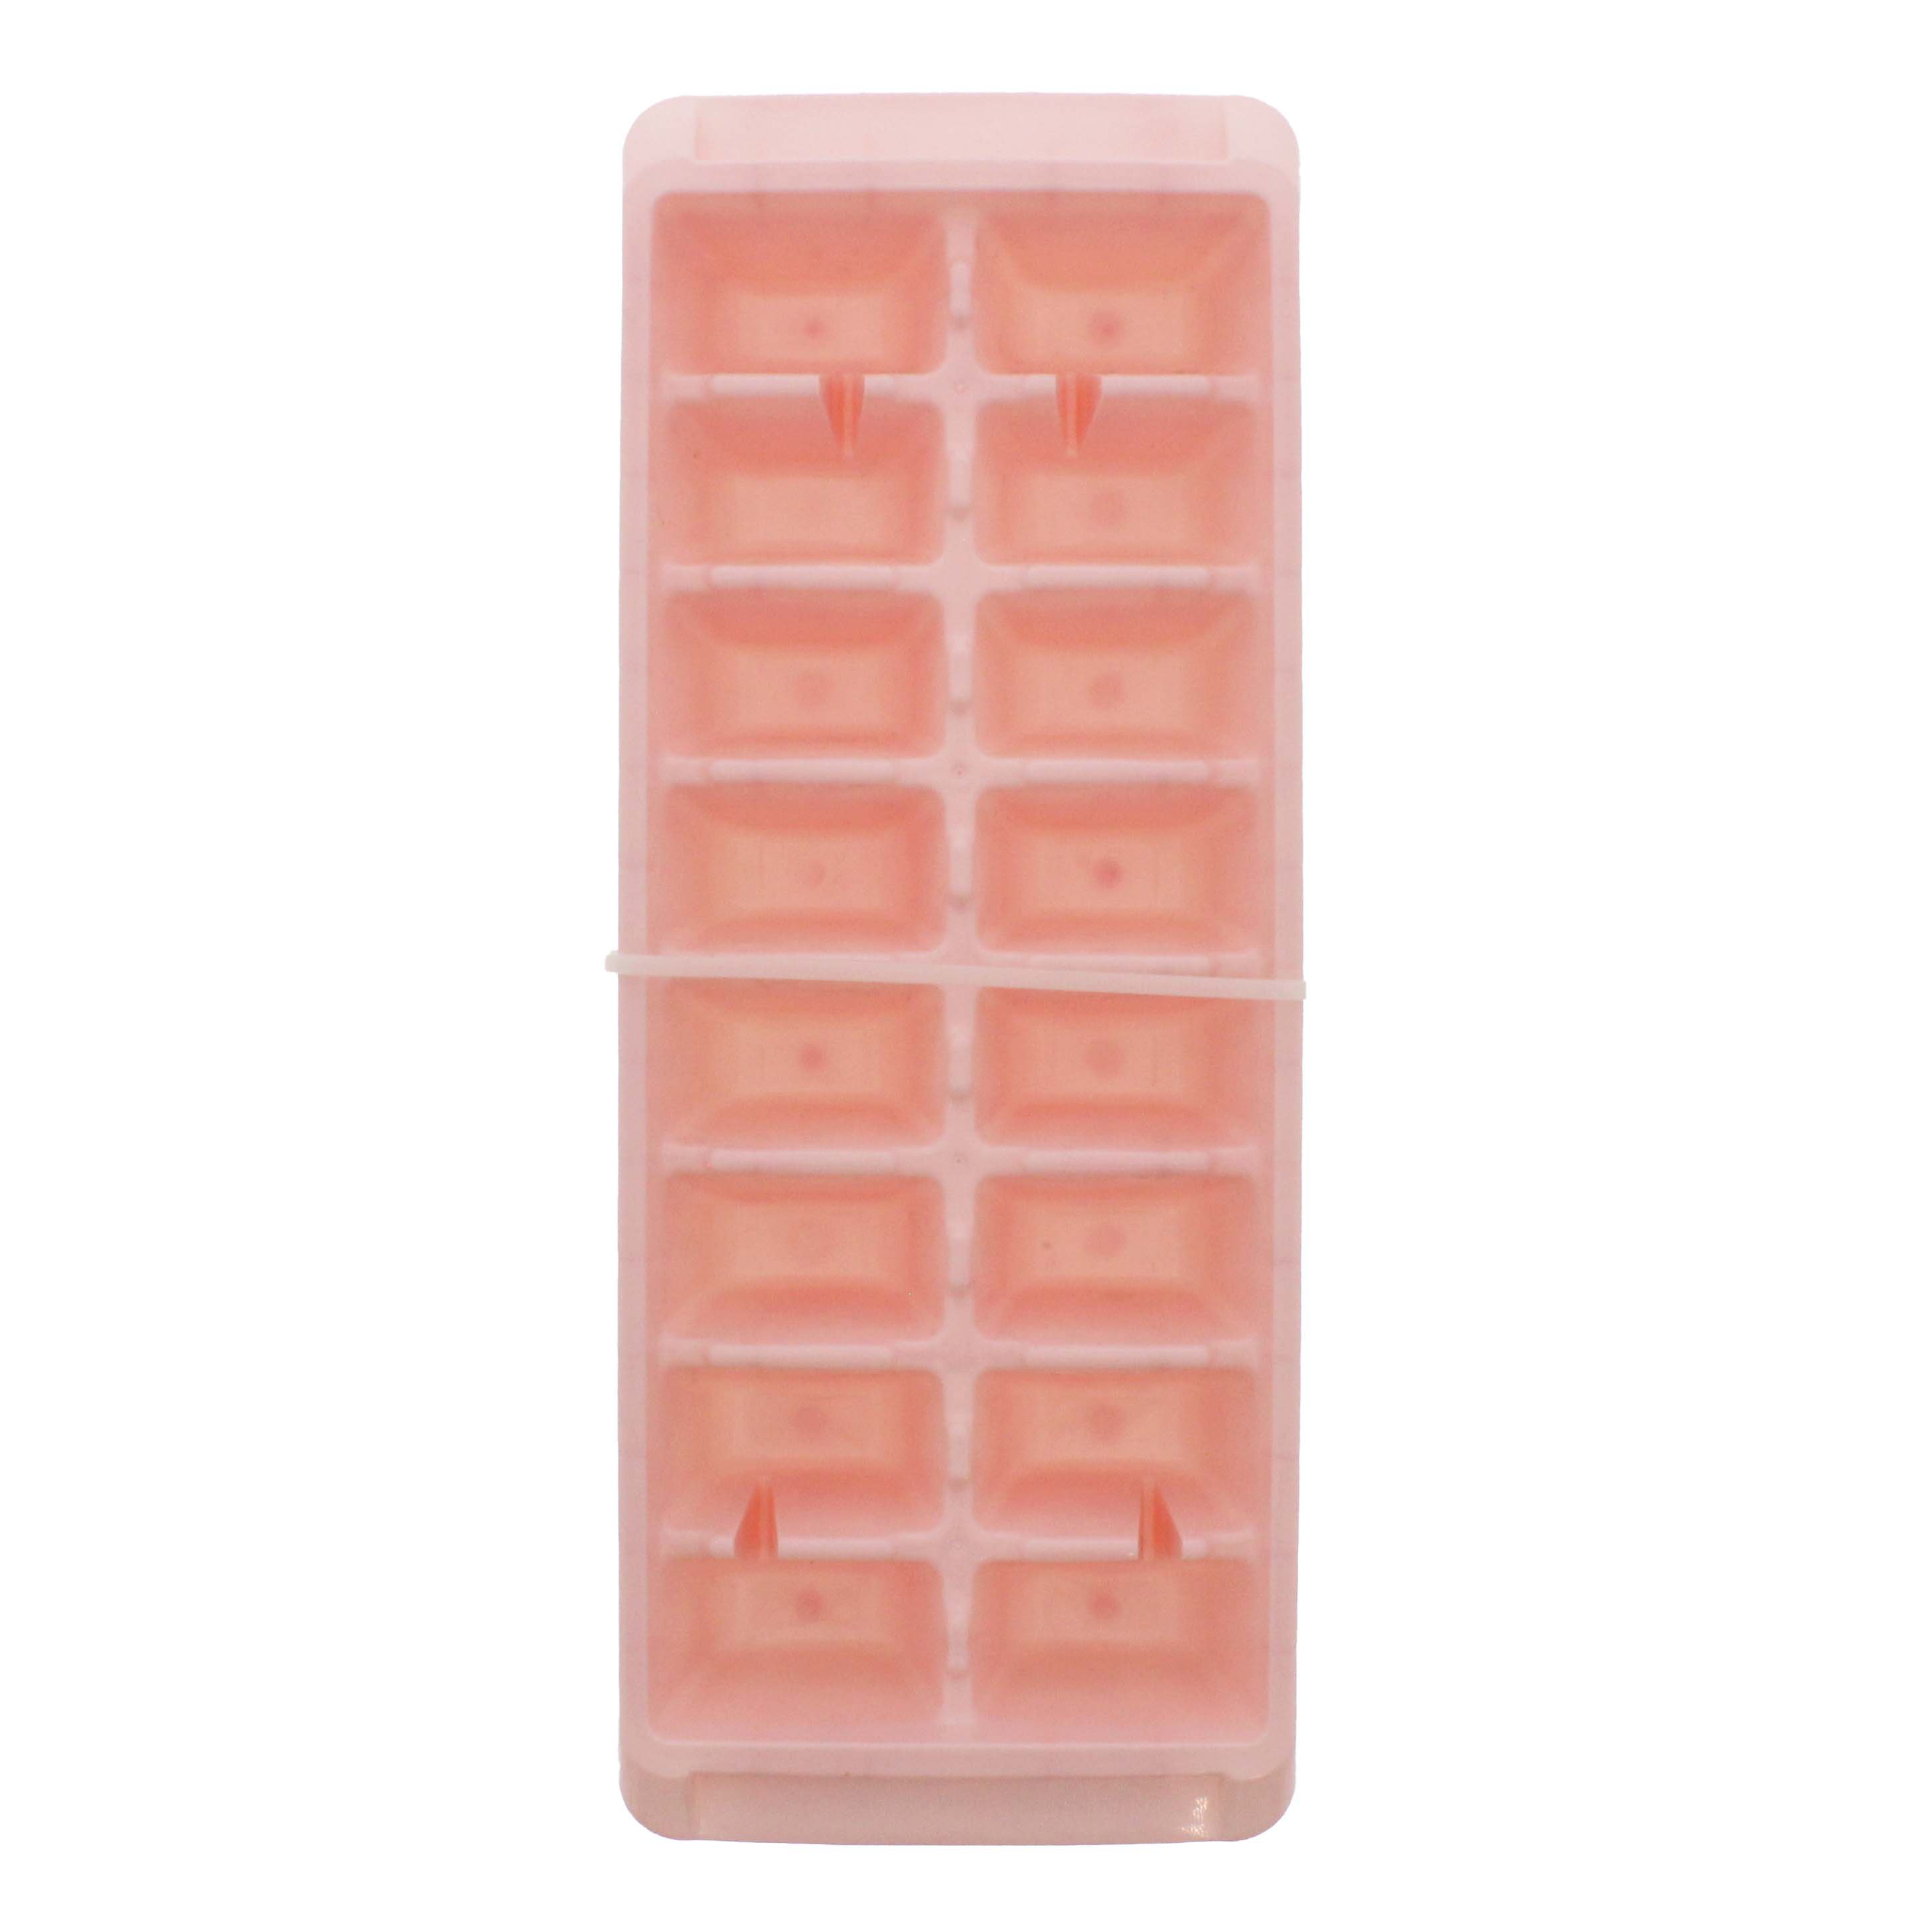 Joie Extra Large Ice Cube Tray - Shop Bar Tools at H-E-B